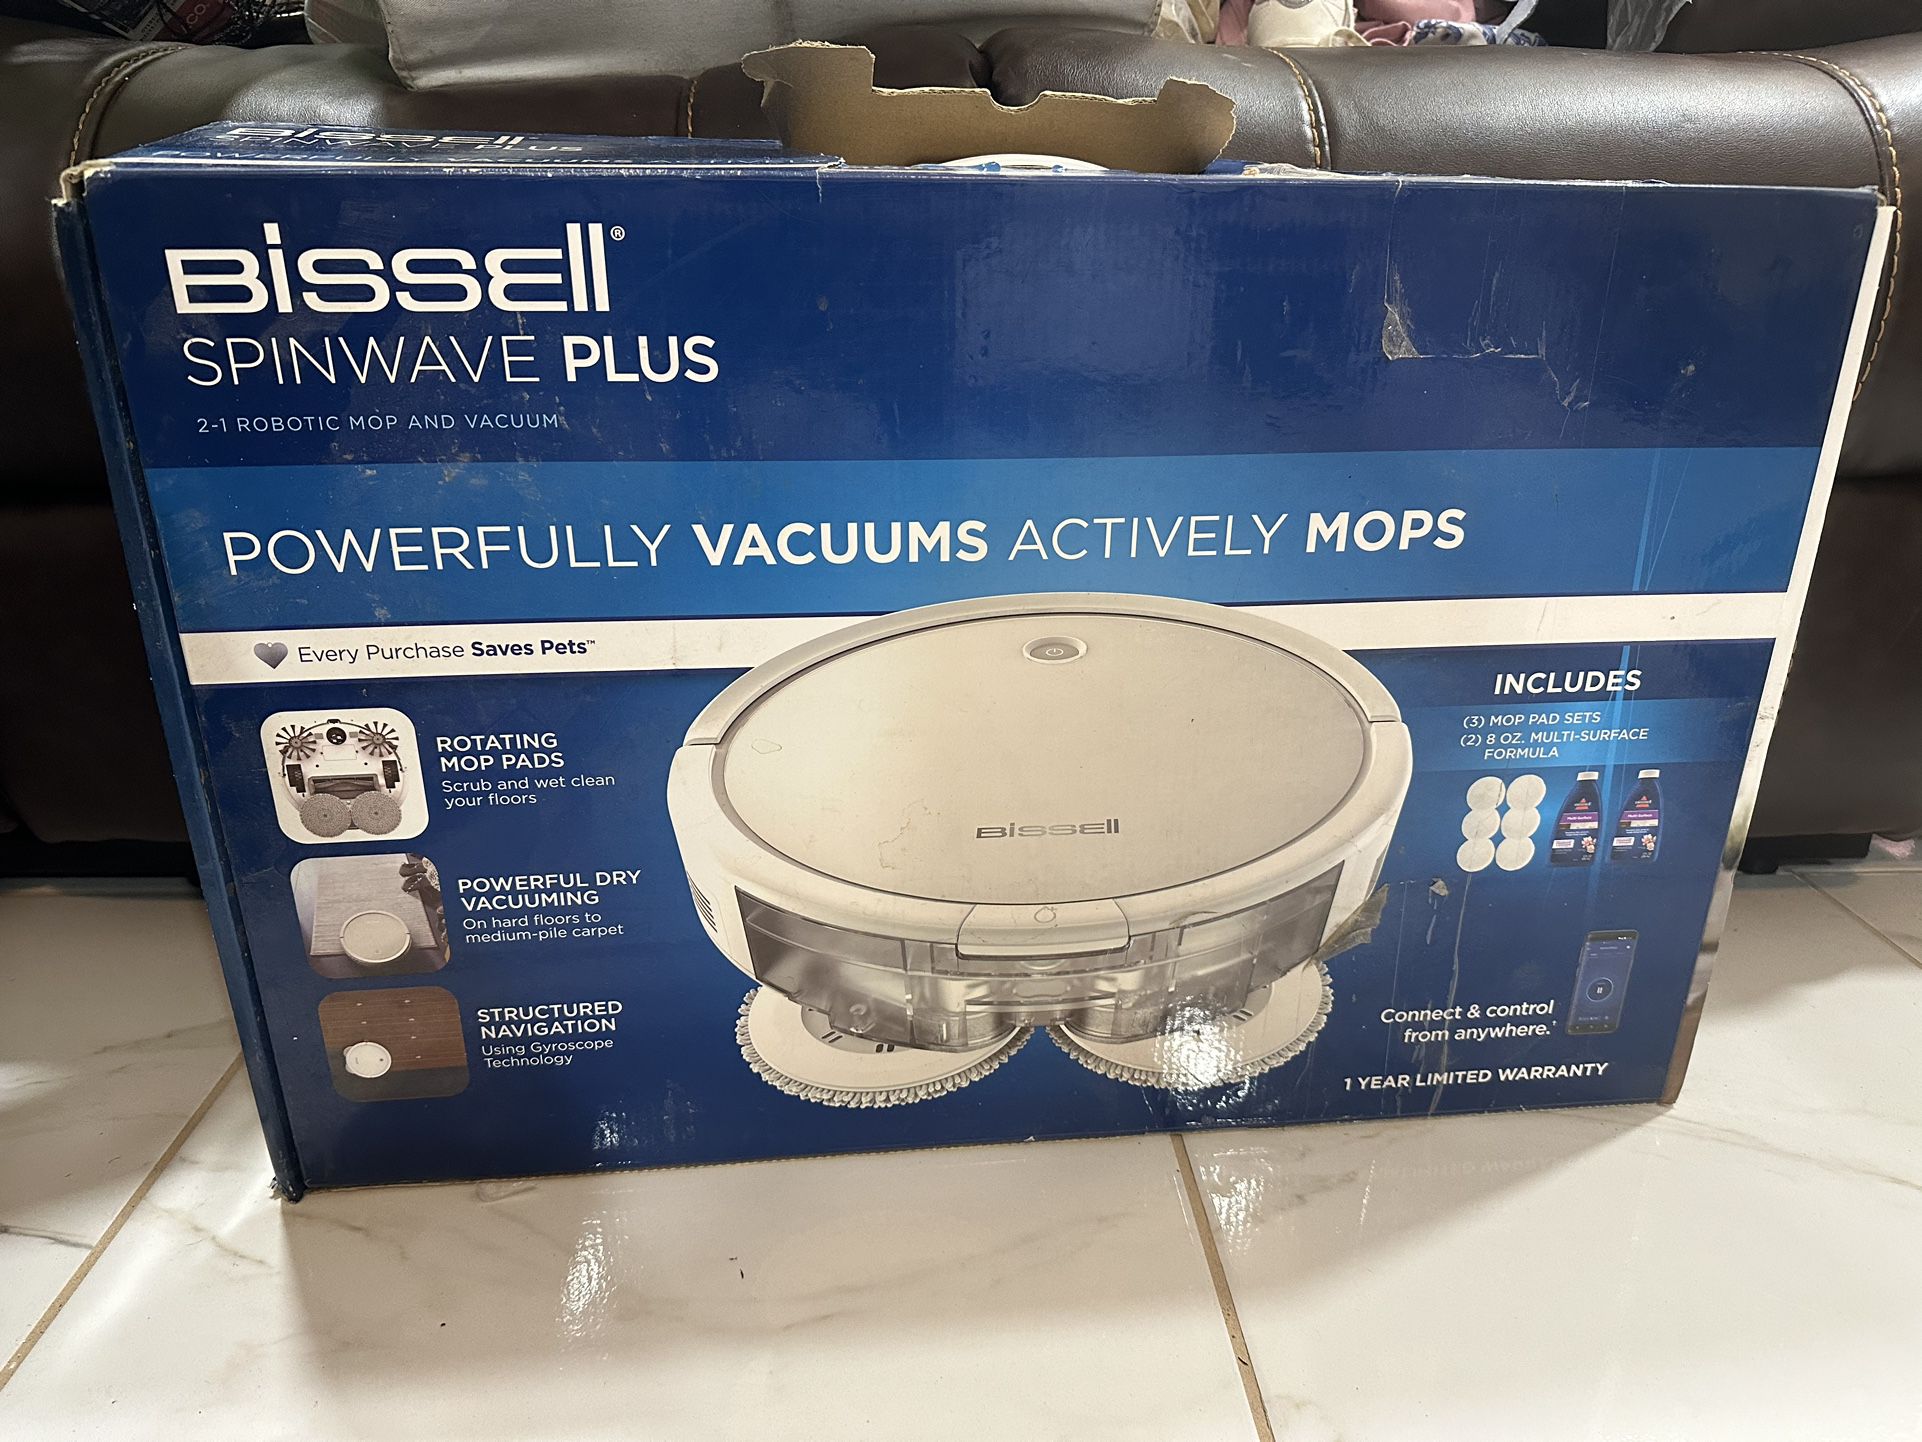 Bissell Spinwave plus